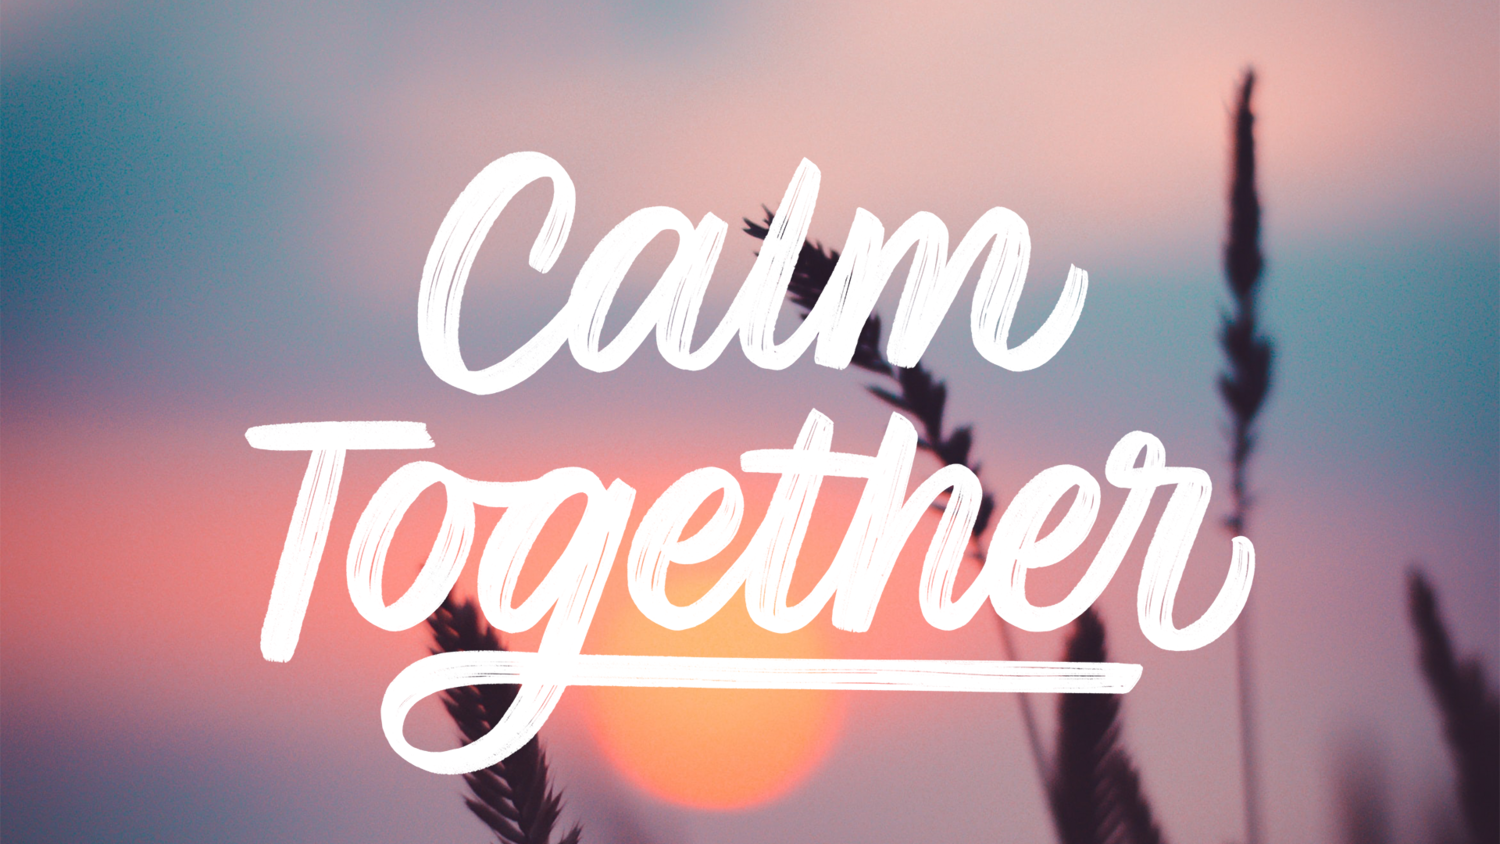 Let's look after ourselves, and each other. - Calm Blog